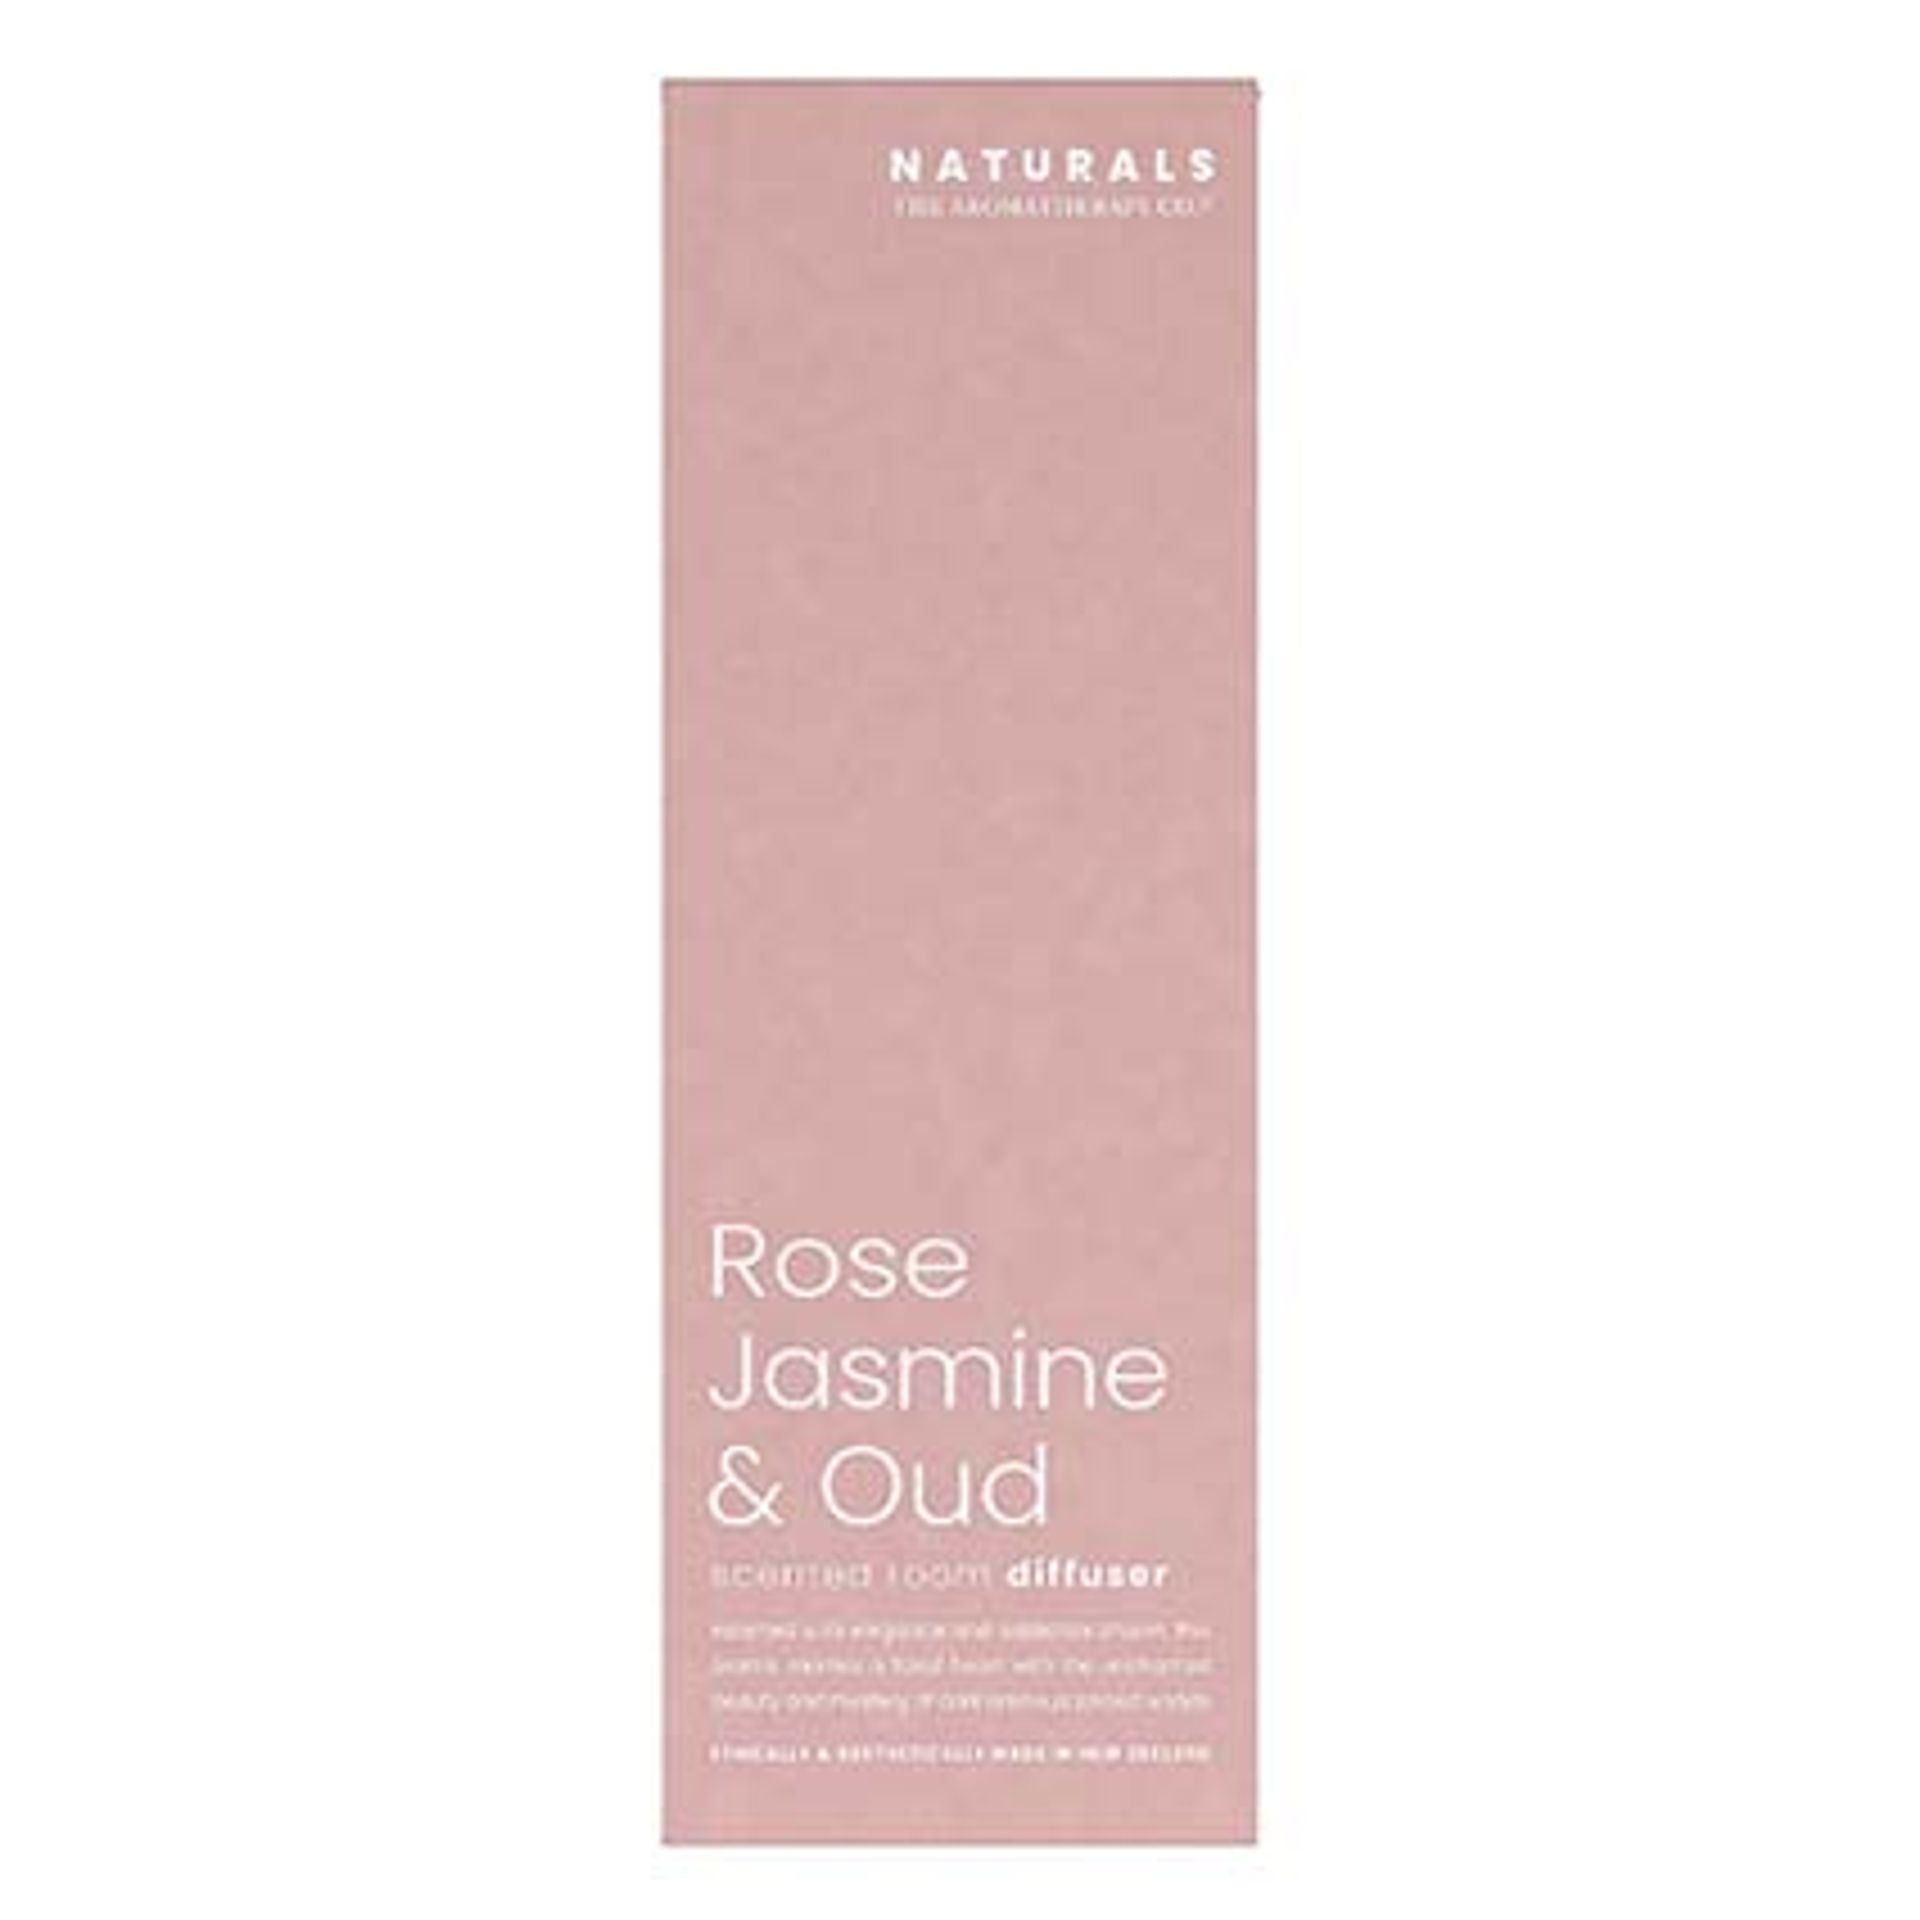 The Aromatherapy Co Naturals Rose Jasmine & Oud Diffuser